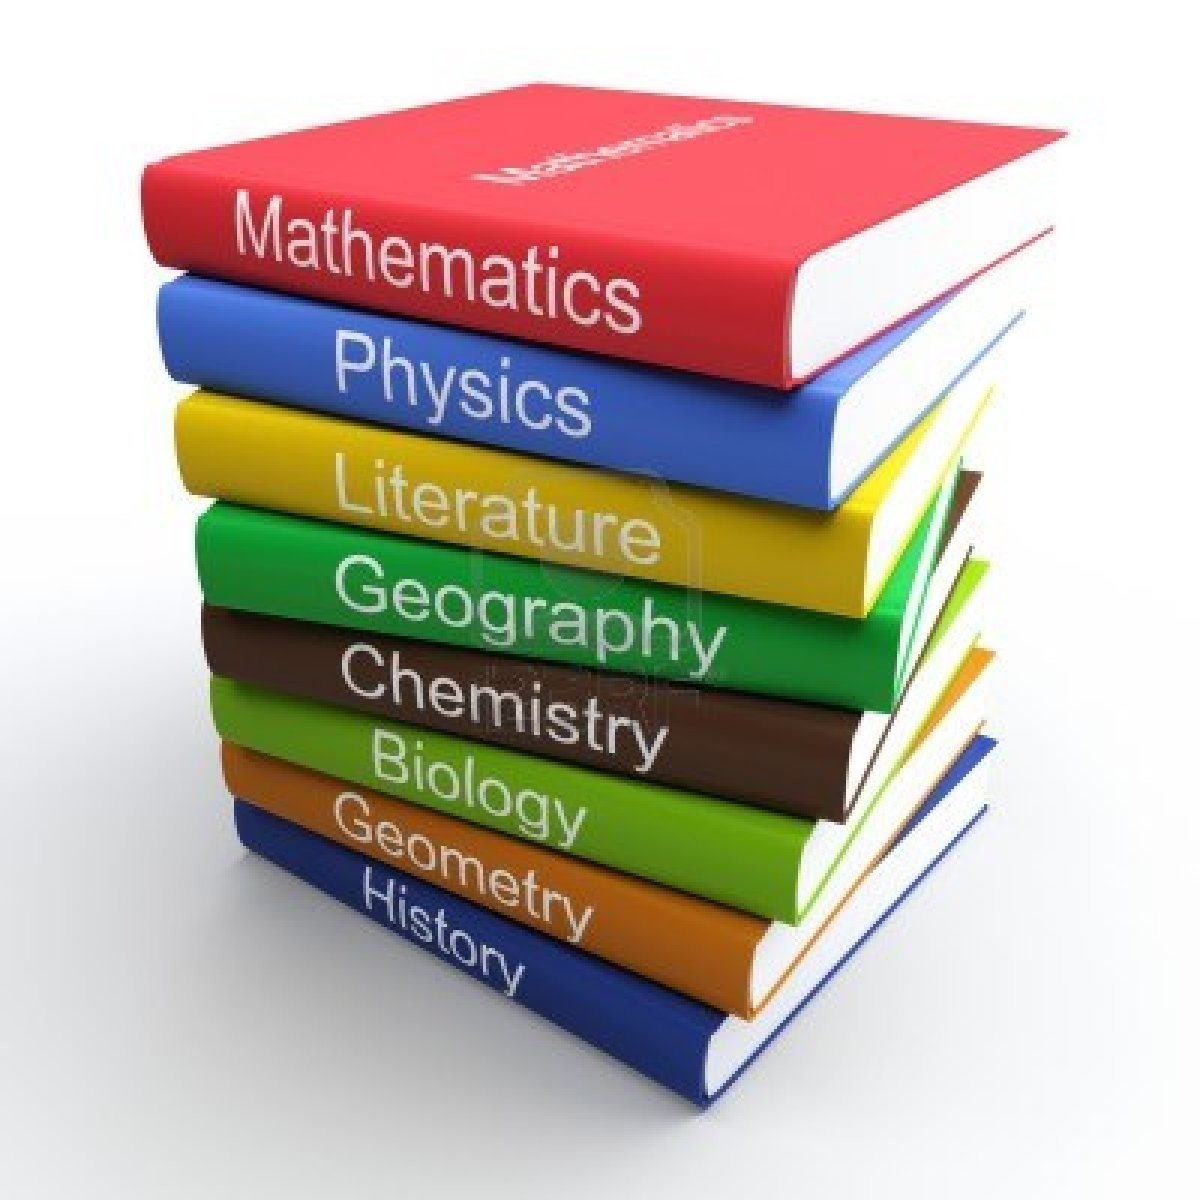 Download Stock Photos Of School Books Images Photography   Royalty    